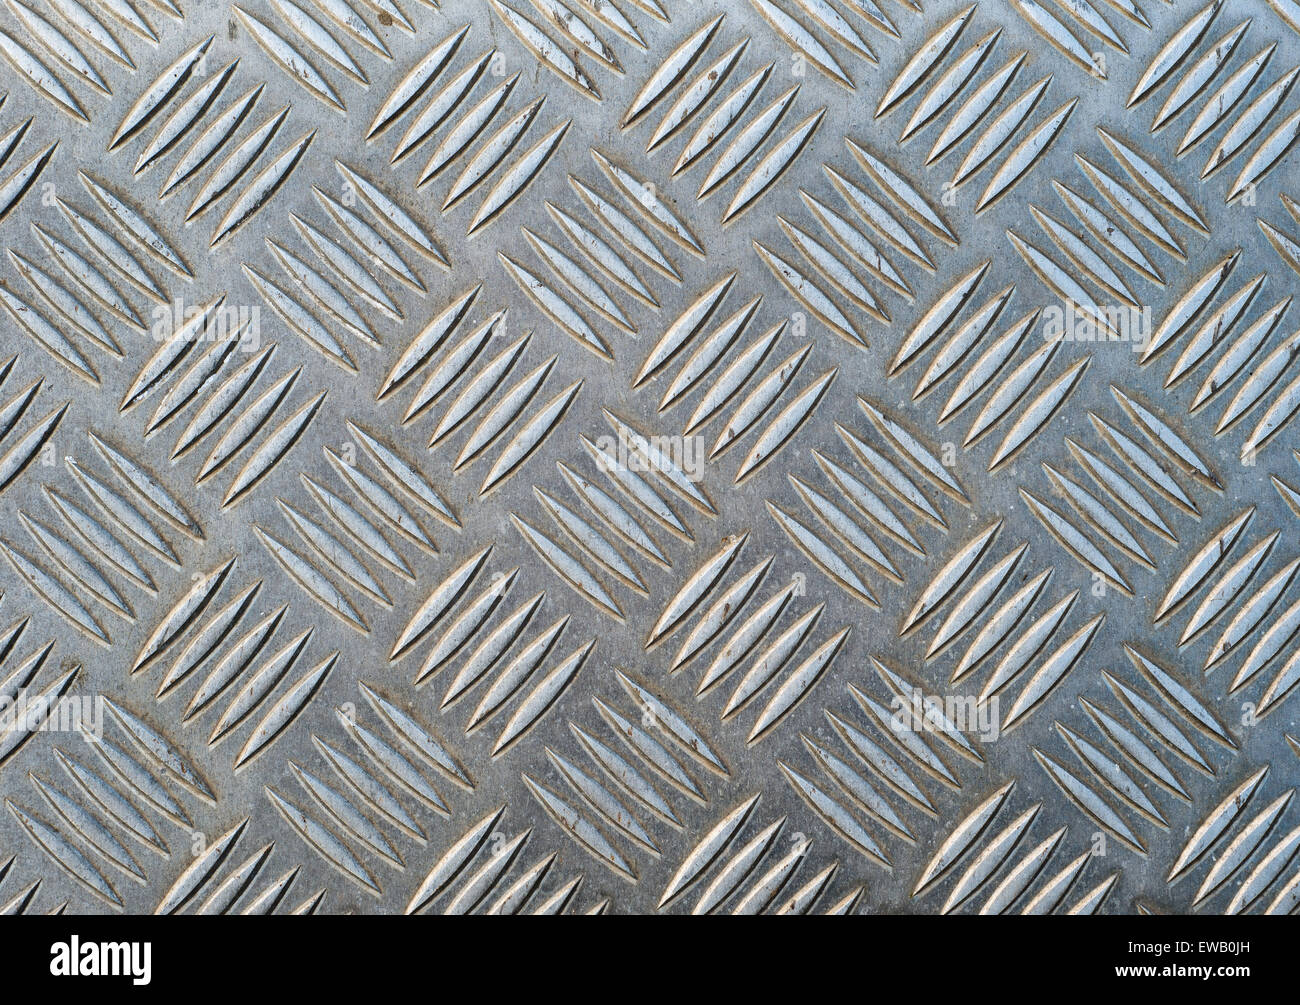 Metal soil texture background in horizontal composition Stock Photo